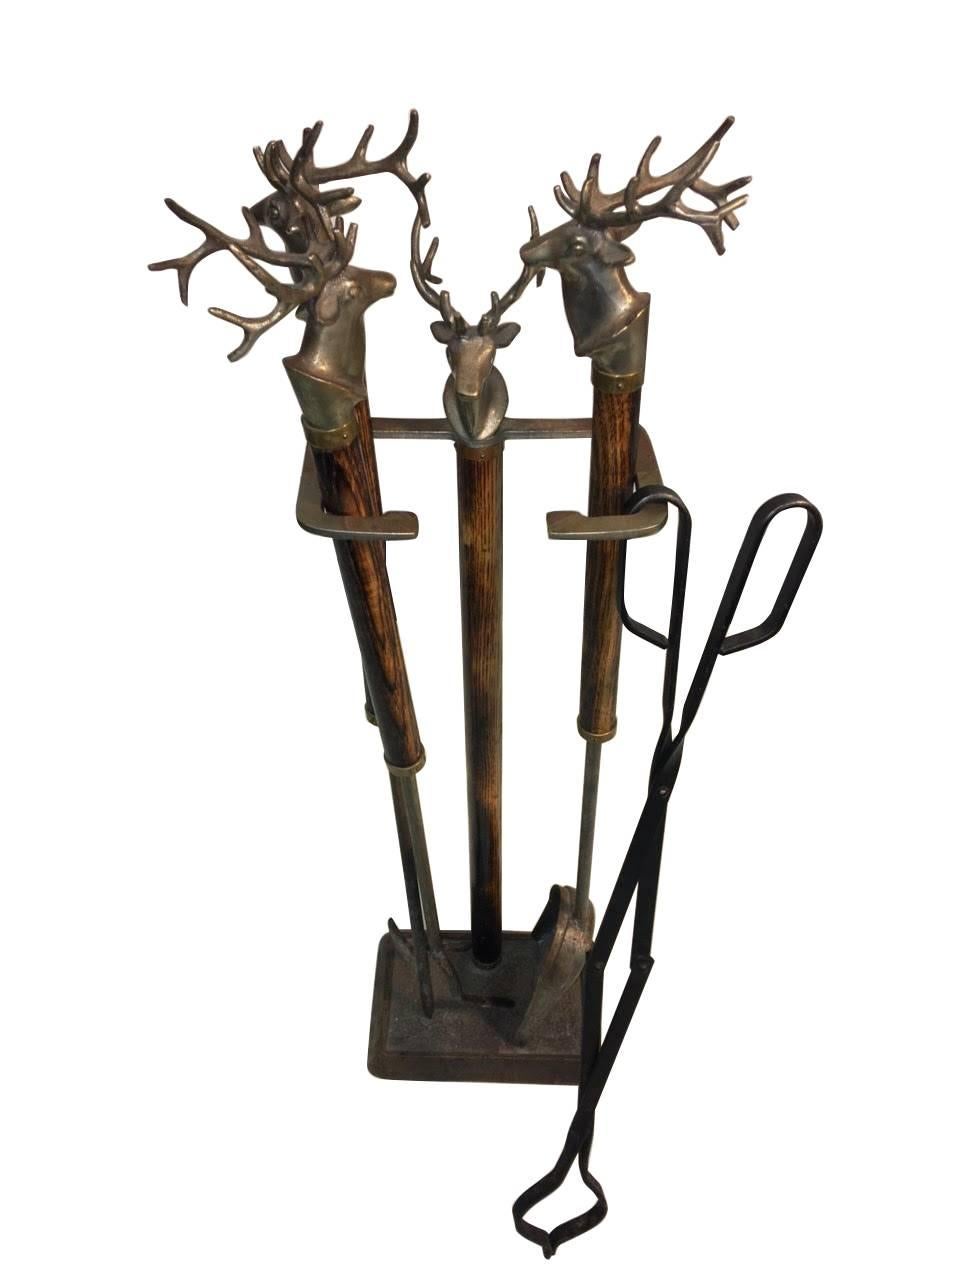 Cast Elk heads in bronze with Ash handles consist of four tools poker and scissor tongs and shovel,
circa 1940 Adirondack style.
 